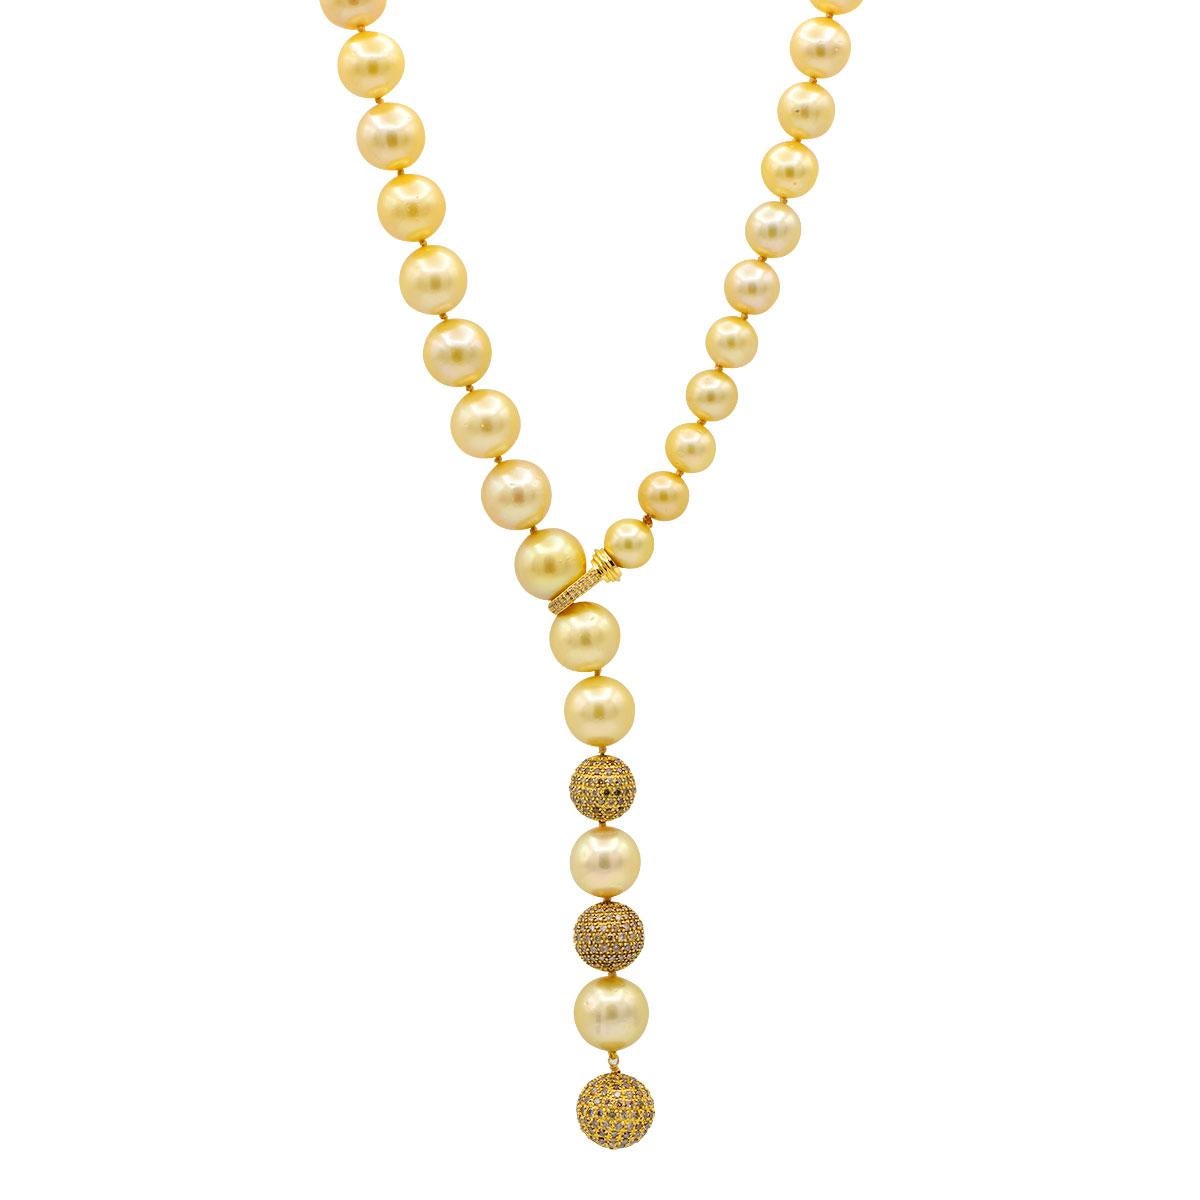 Style and glamour are in the spotlight with this exquisite golden south sea and diamond necklace. This 18-karat round-cut necklace is made from 38 pearls with a yellow gold toggle clasp with diamonds. The size of the pearls is 10.2-14.8 mm. The